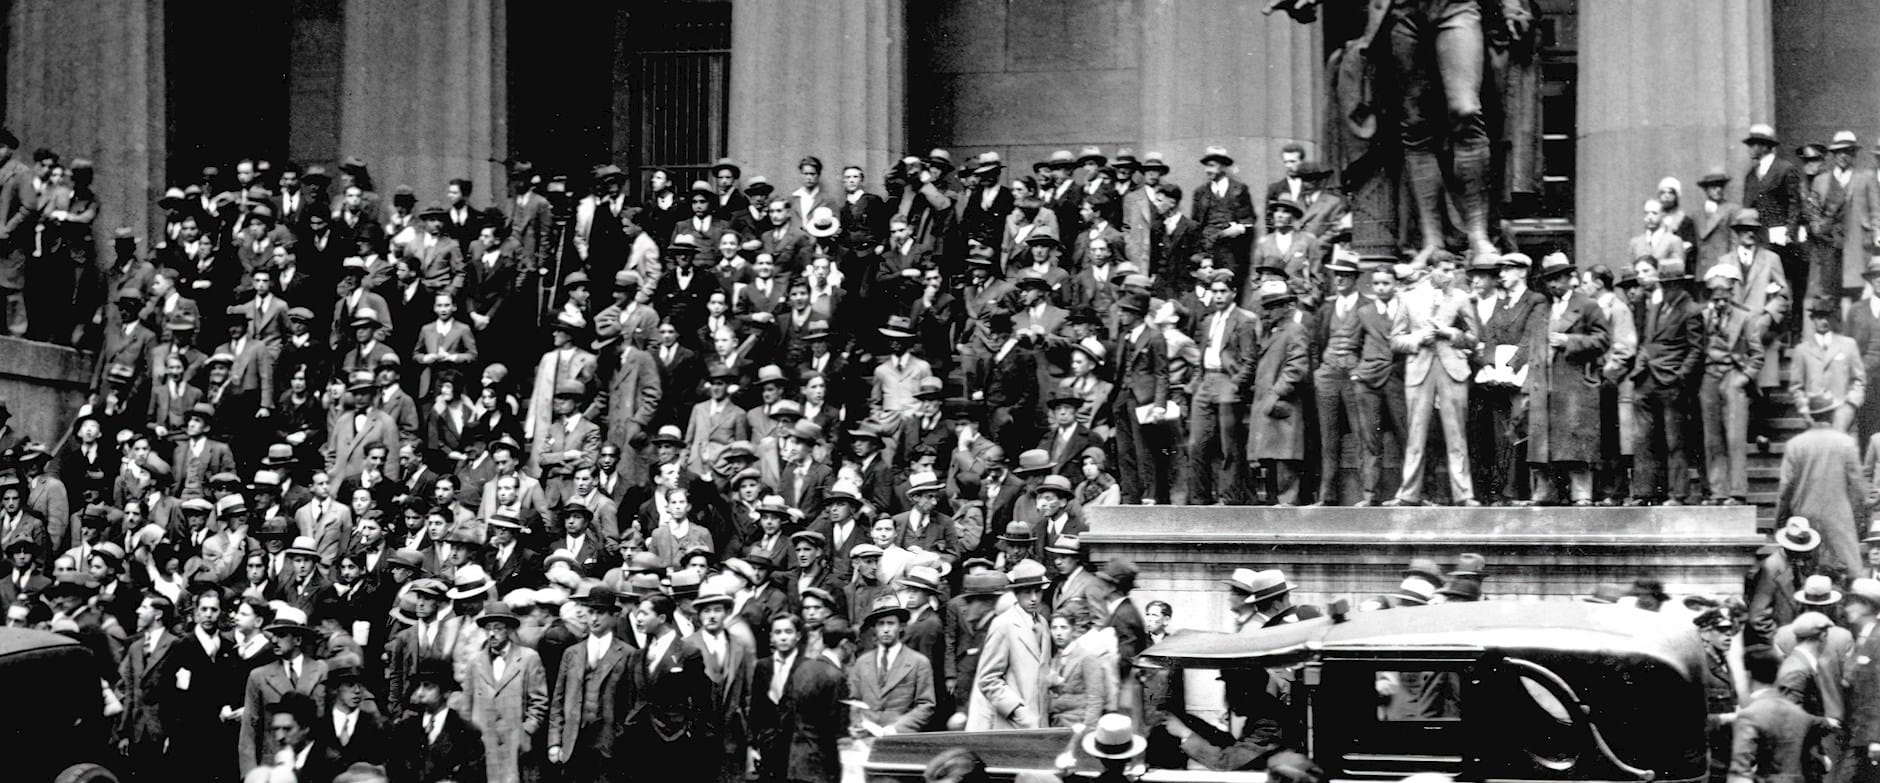 Crowd outside Wall Street during the stock market crash of 1929